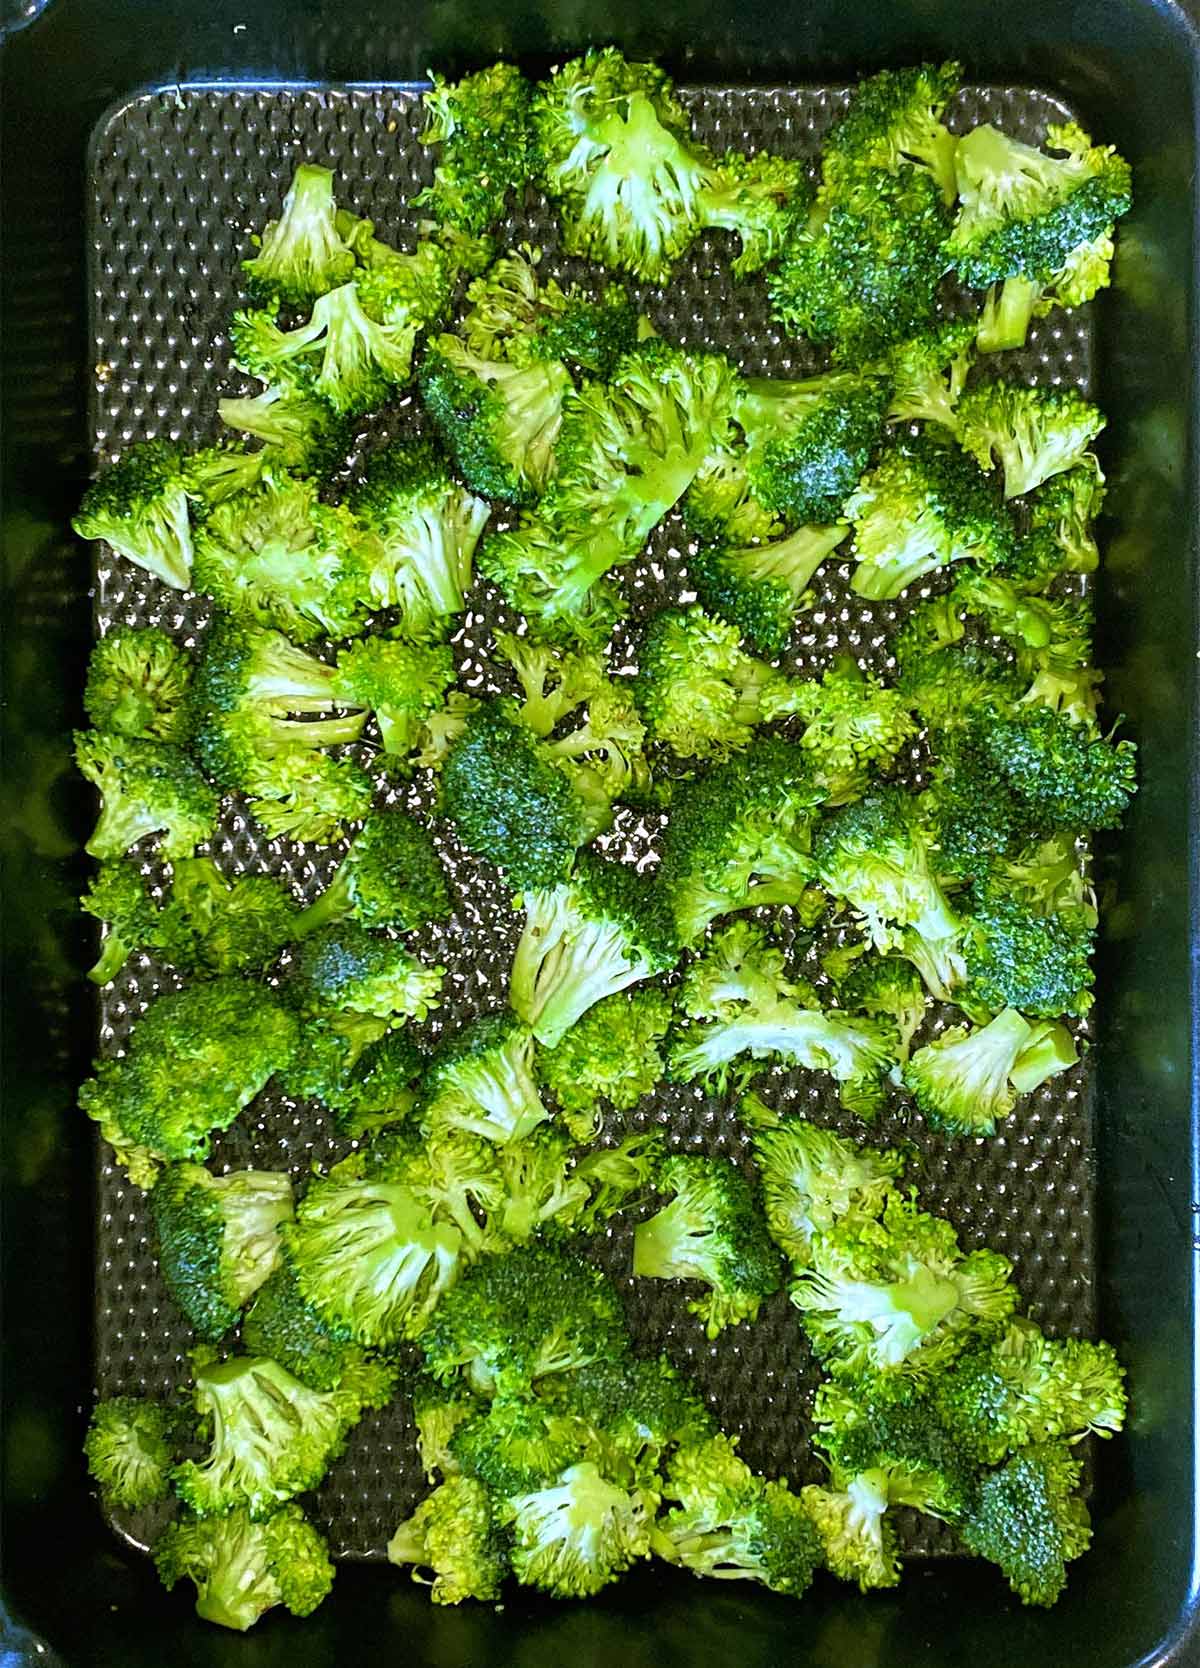 Coated broccoli florets spread over a baking tray.